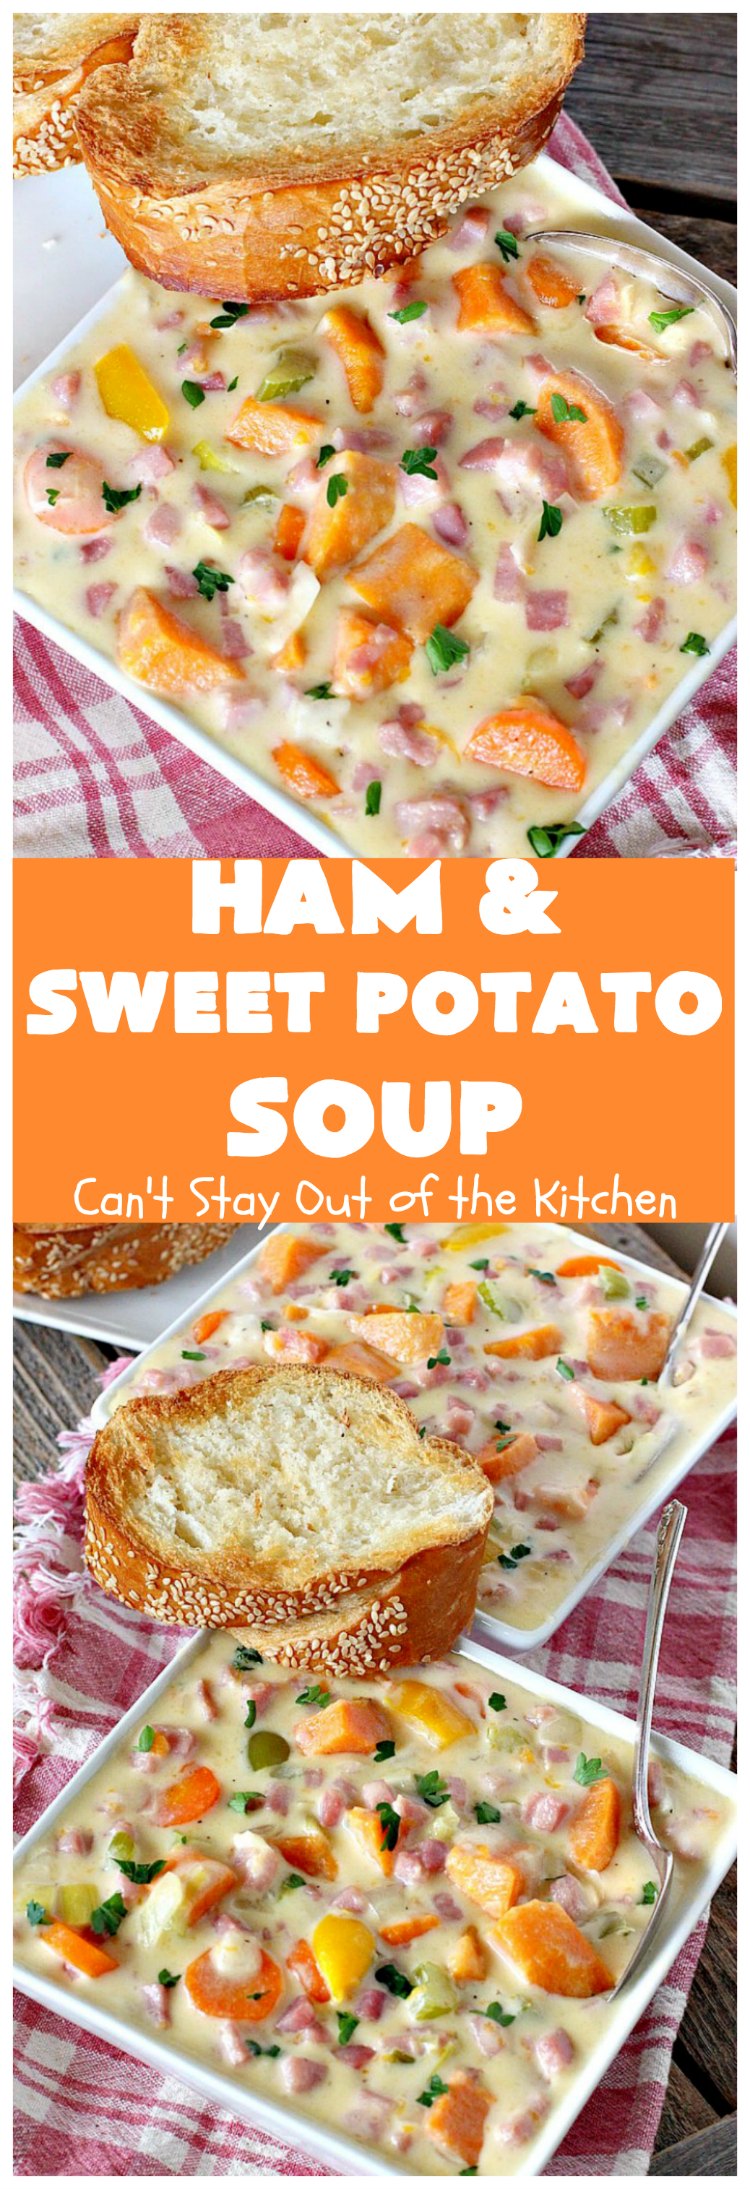 Ham & Sweet Potato Soup | Can't Stay Out of the Kitchen